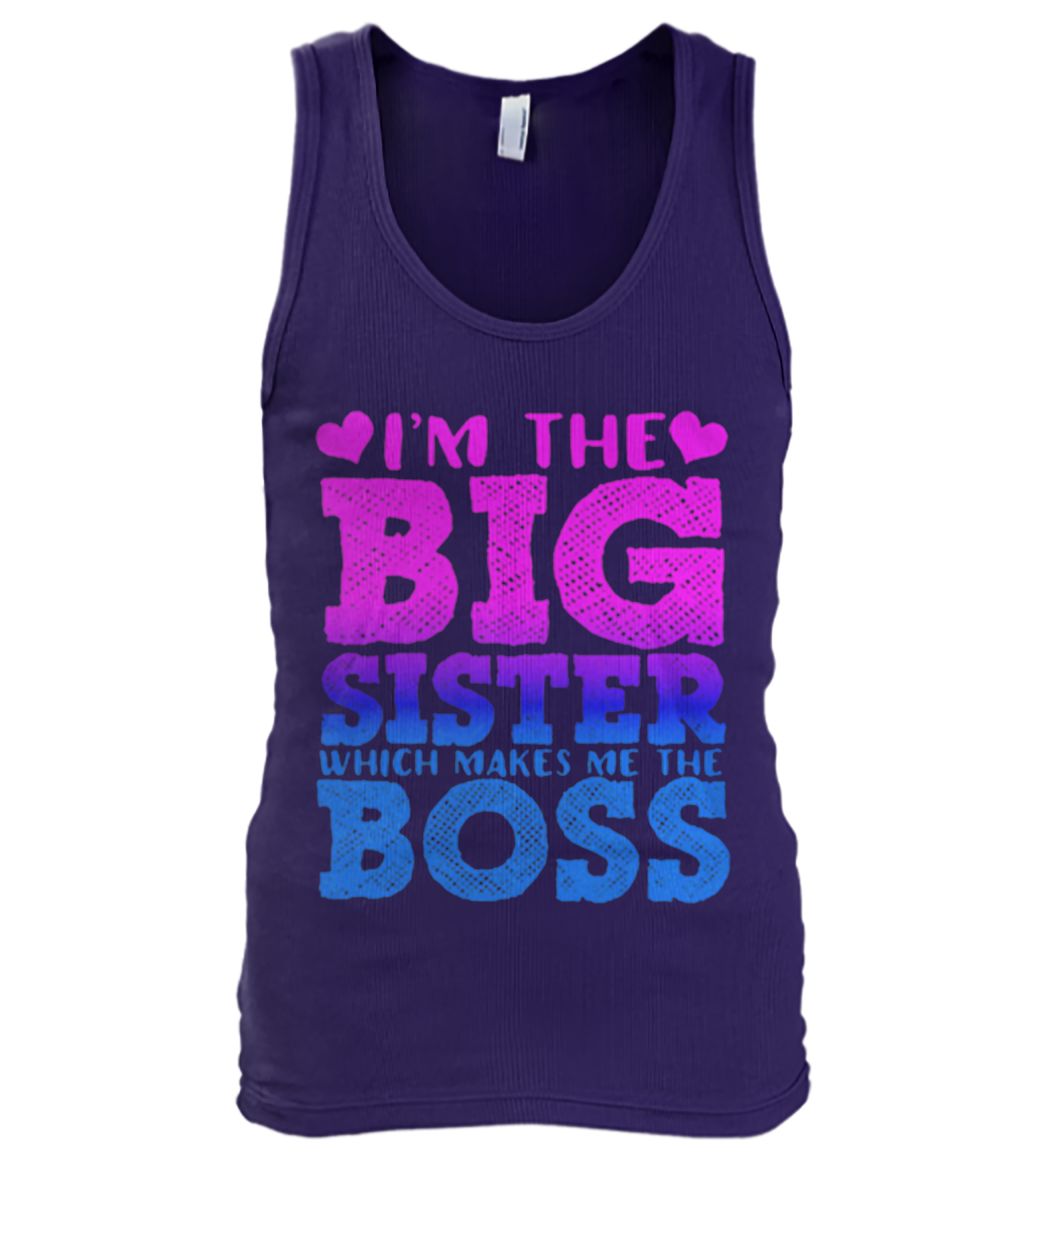 I'm the big sister which makes me boss men's tank top